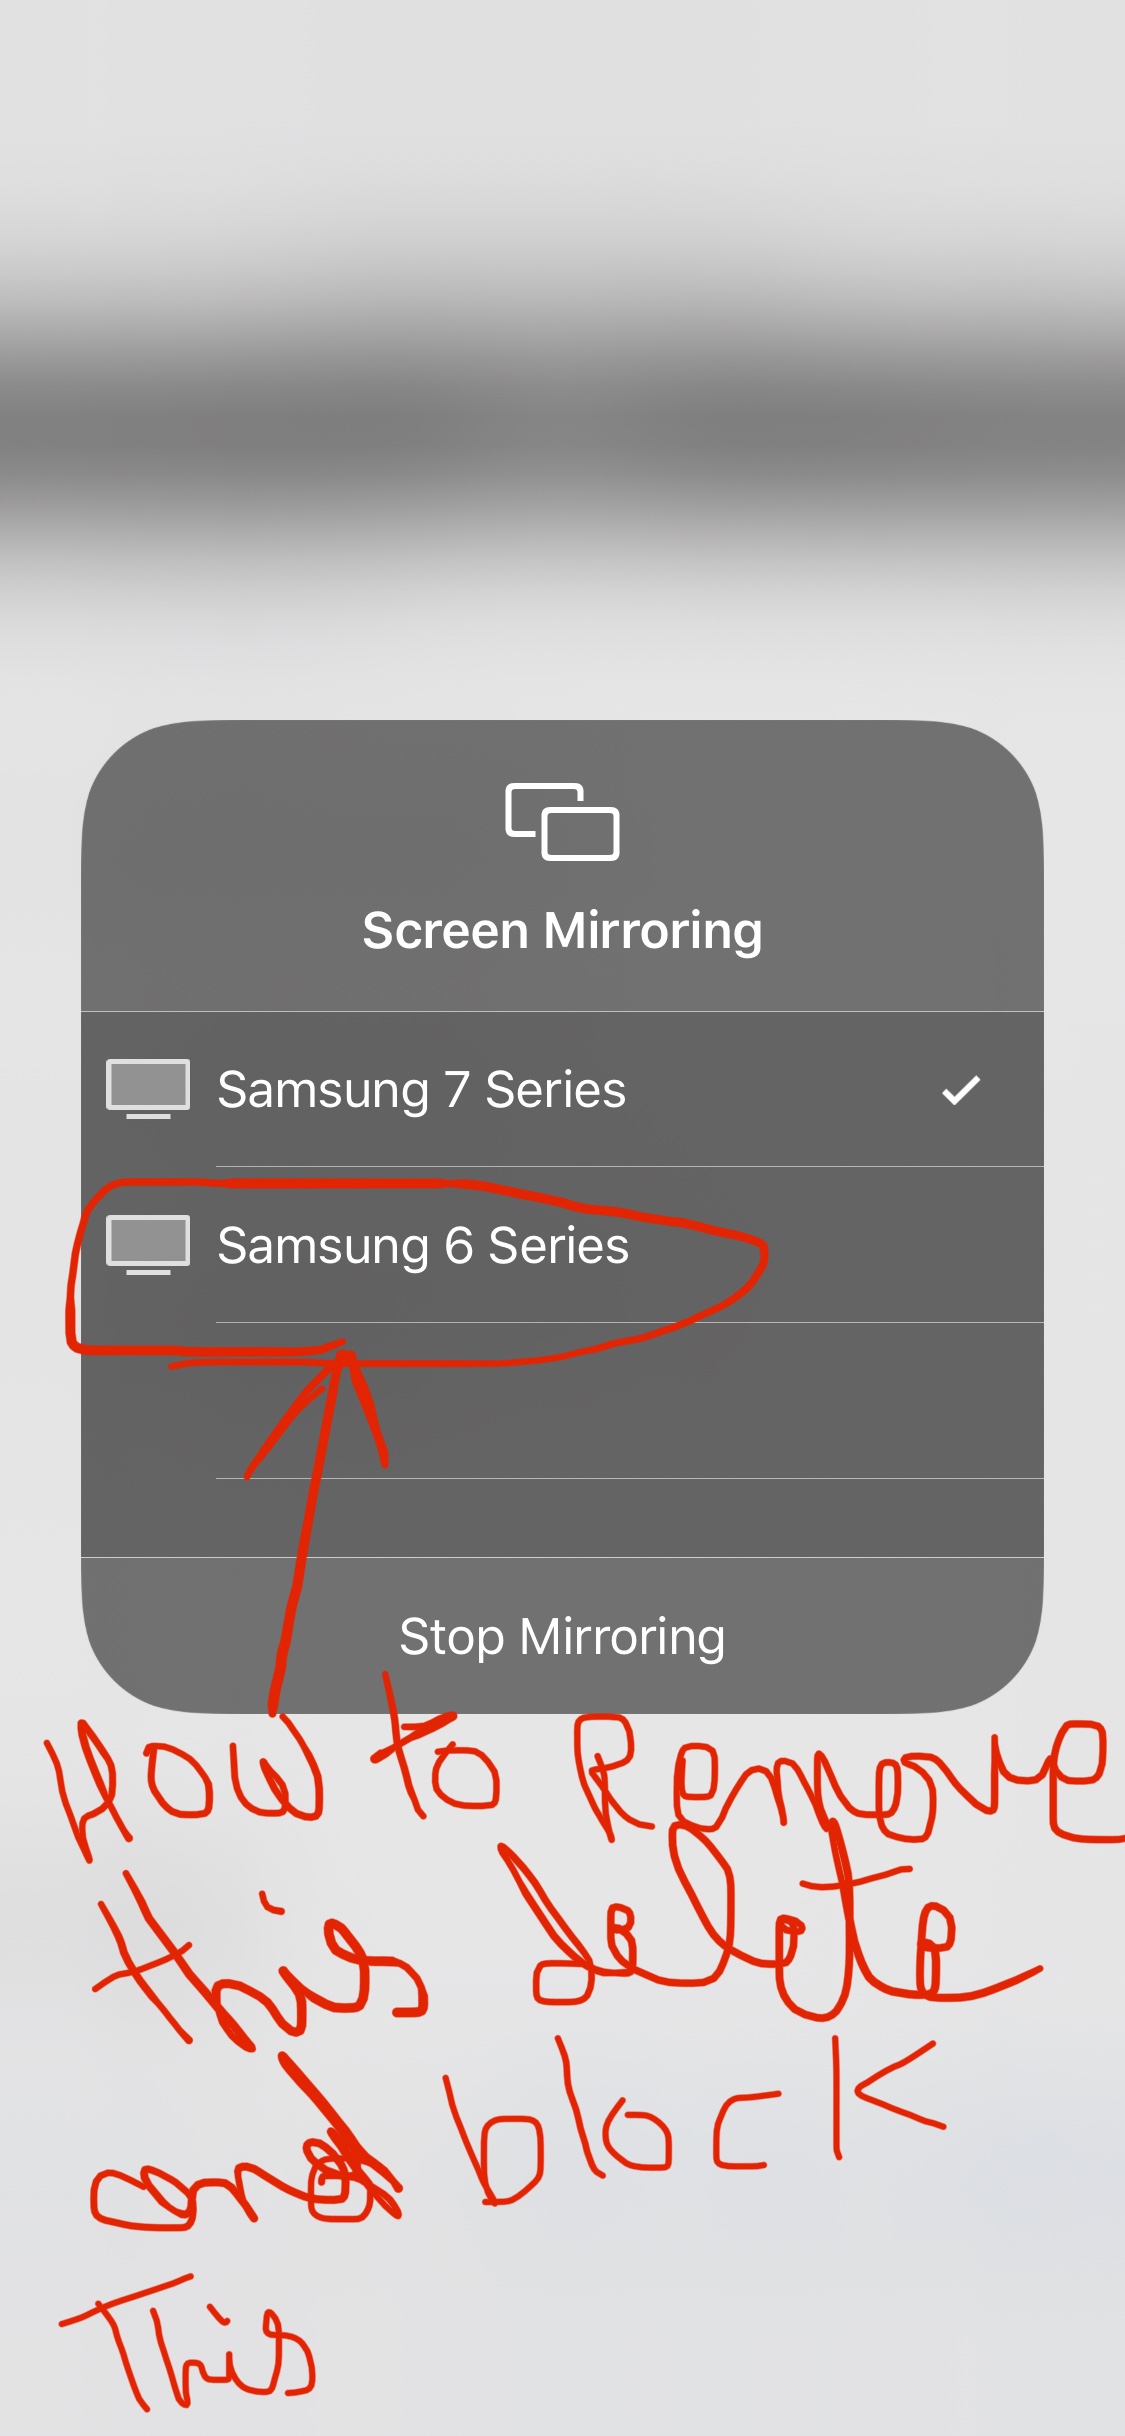 How To Remove Samsung Tv From Iphone, How To Mirror Samsung Tv Iphone